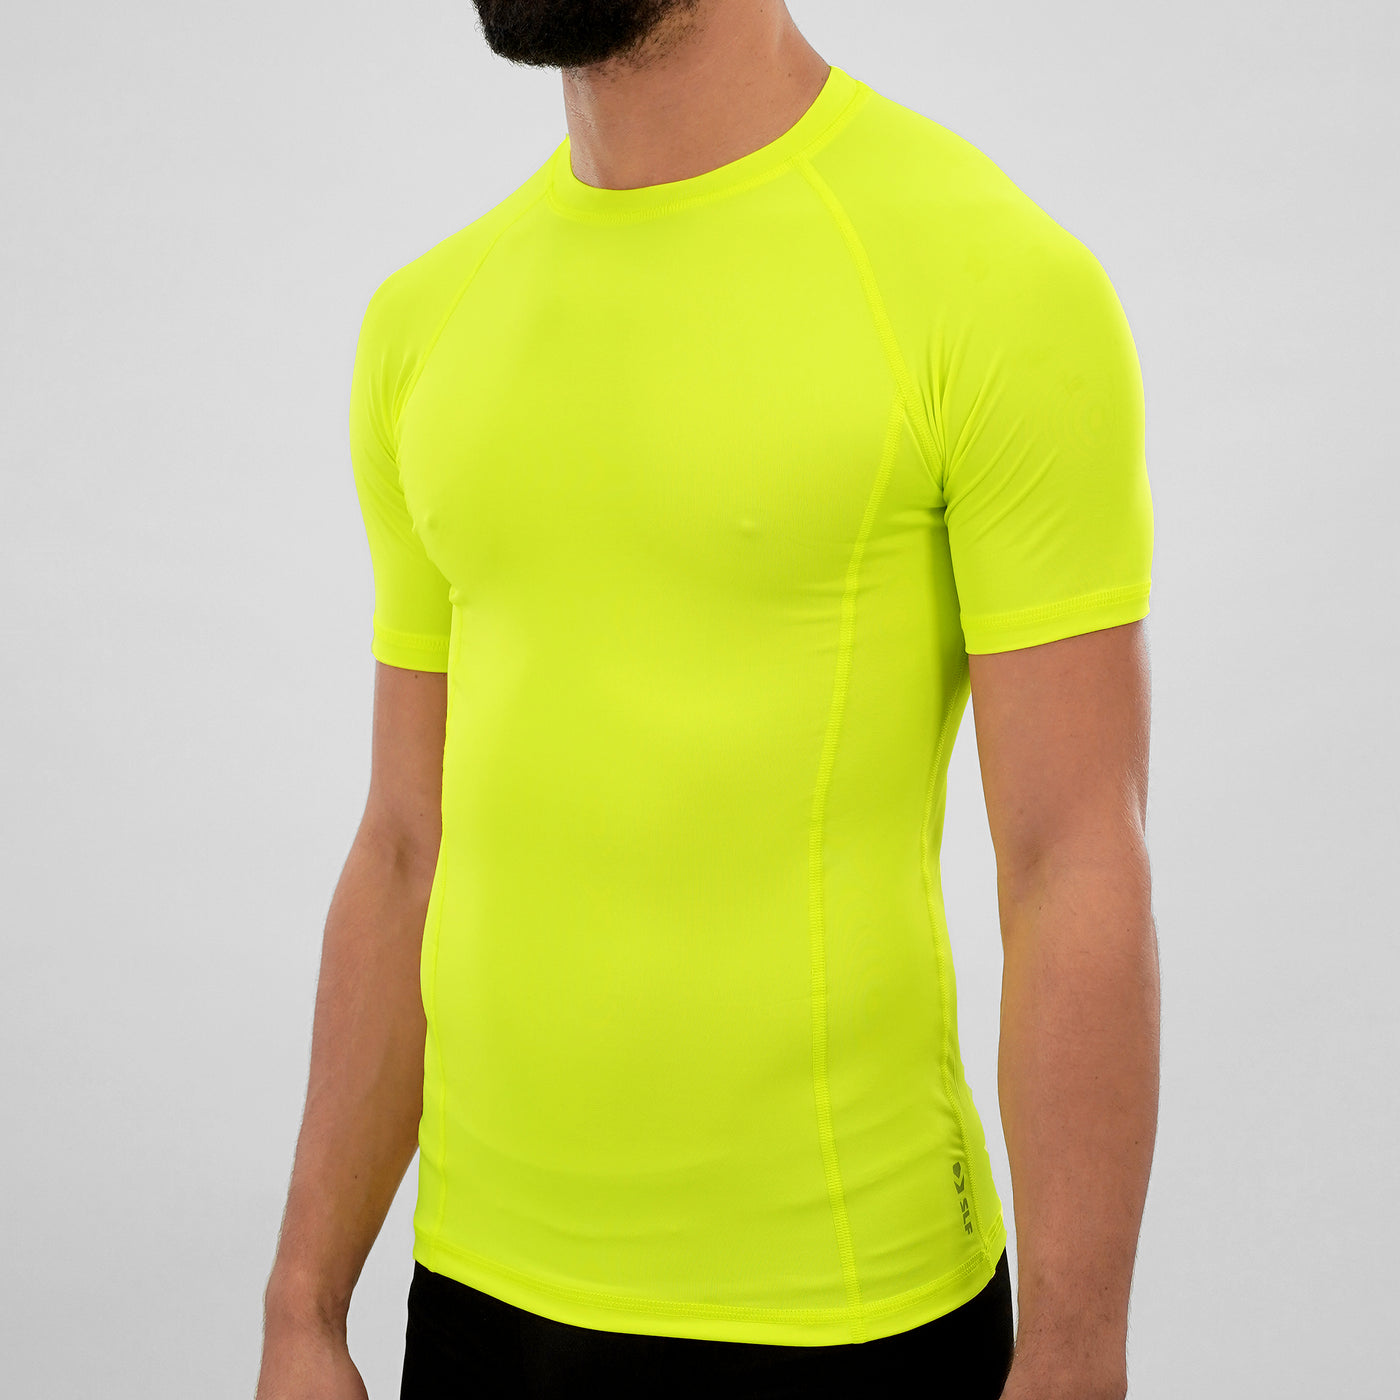 Safety Yellow Compression Shirt